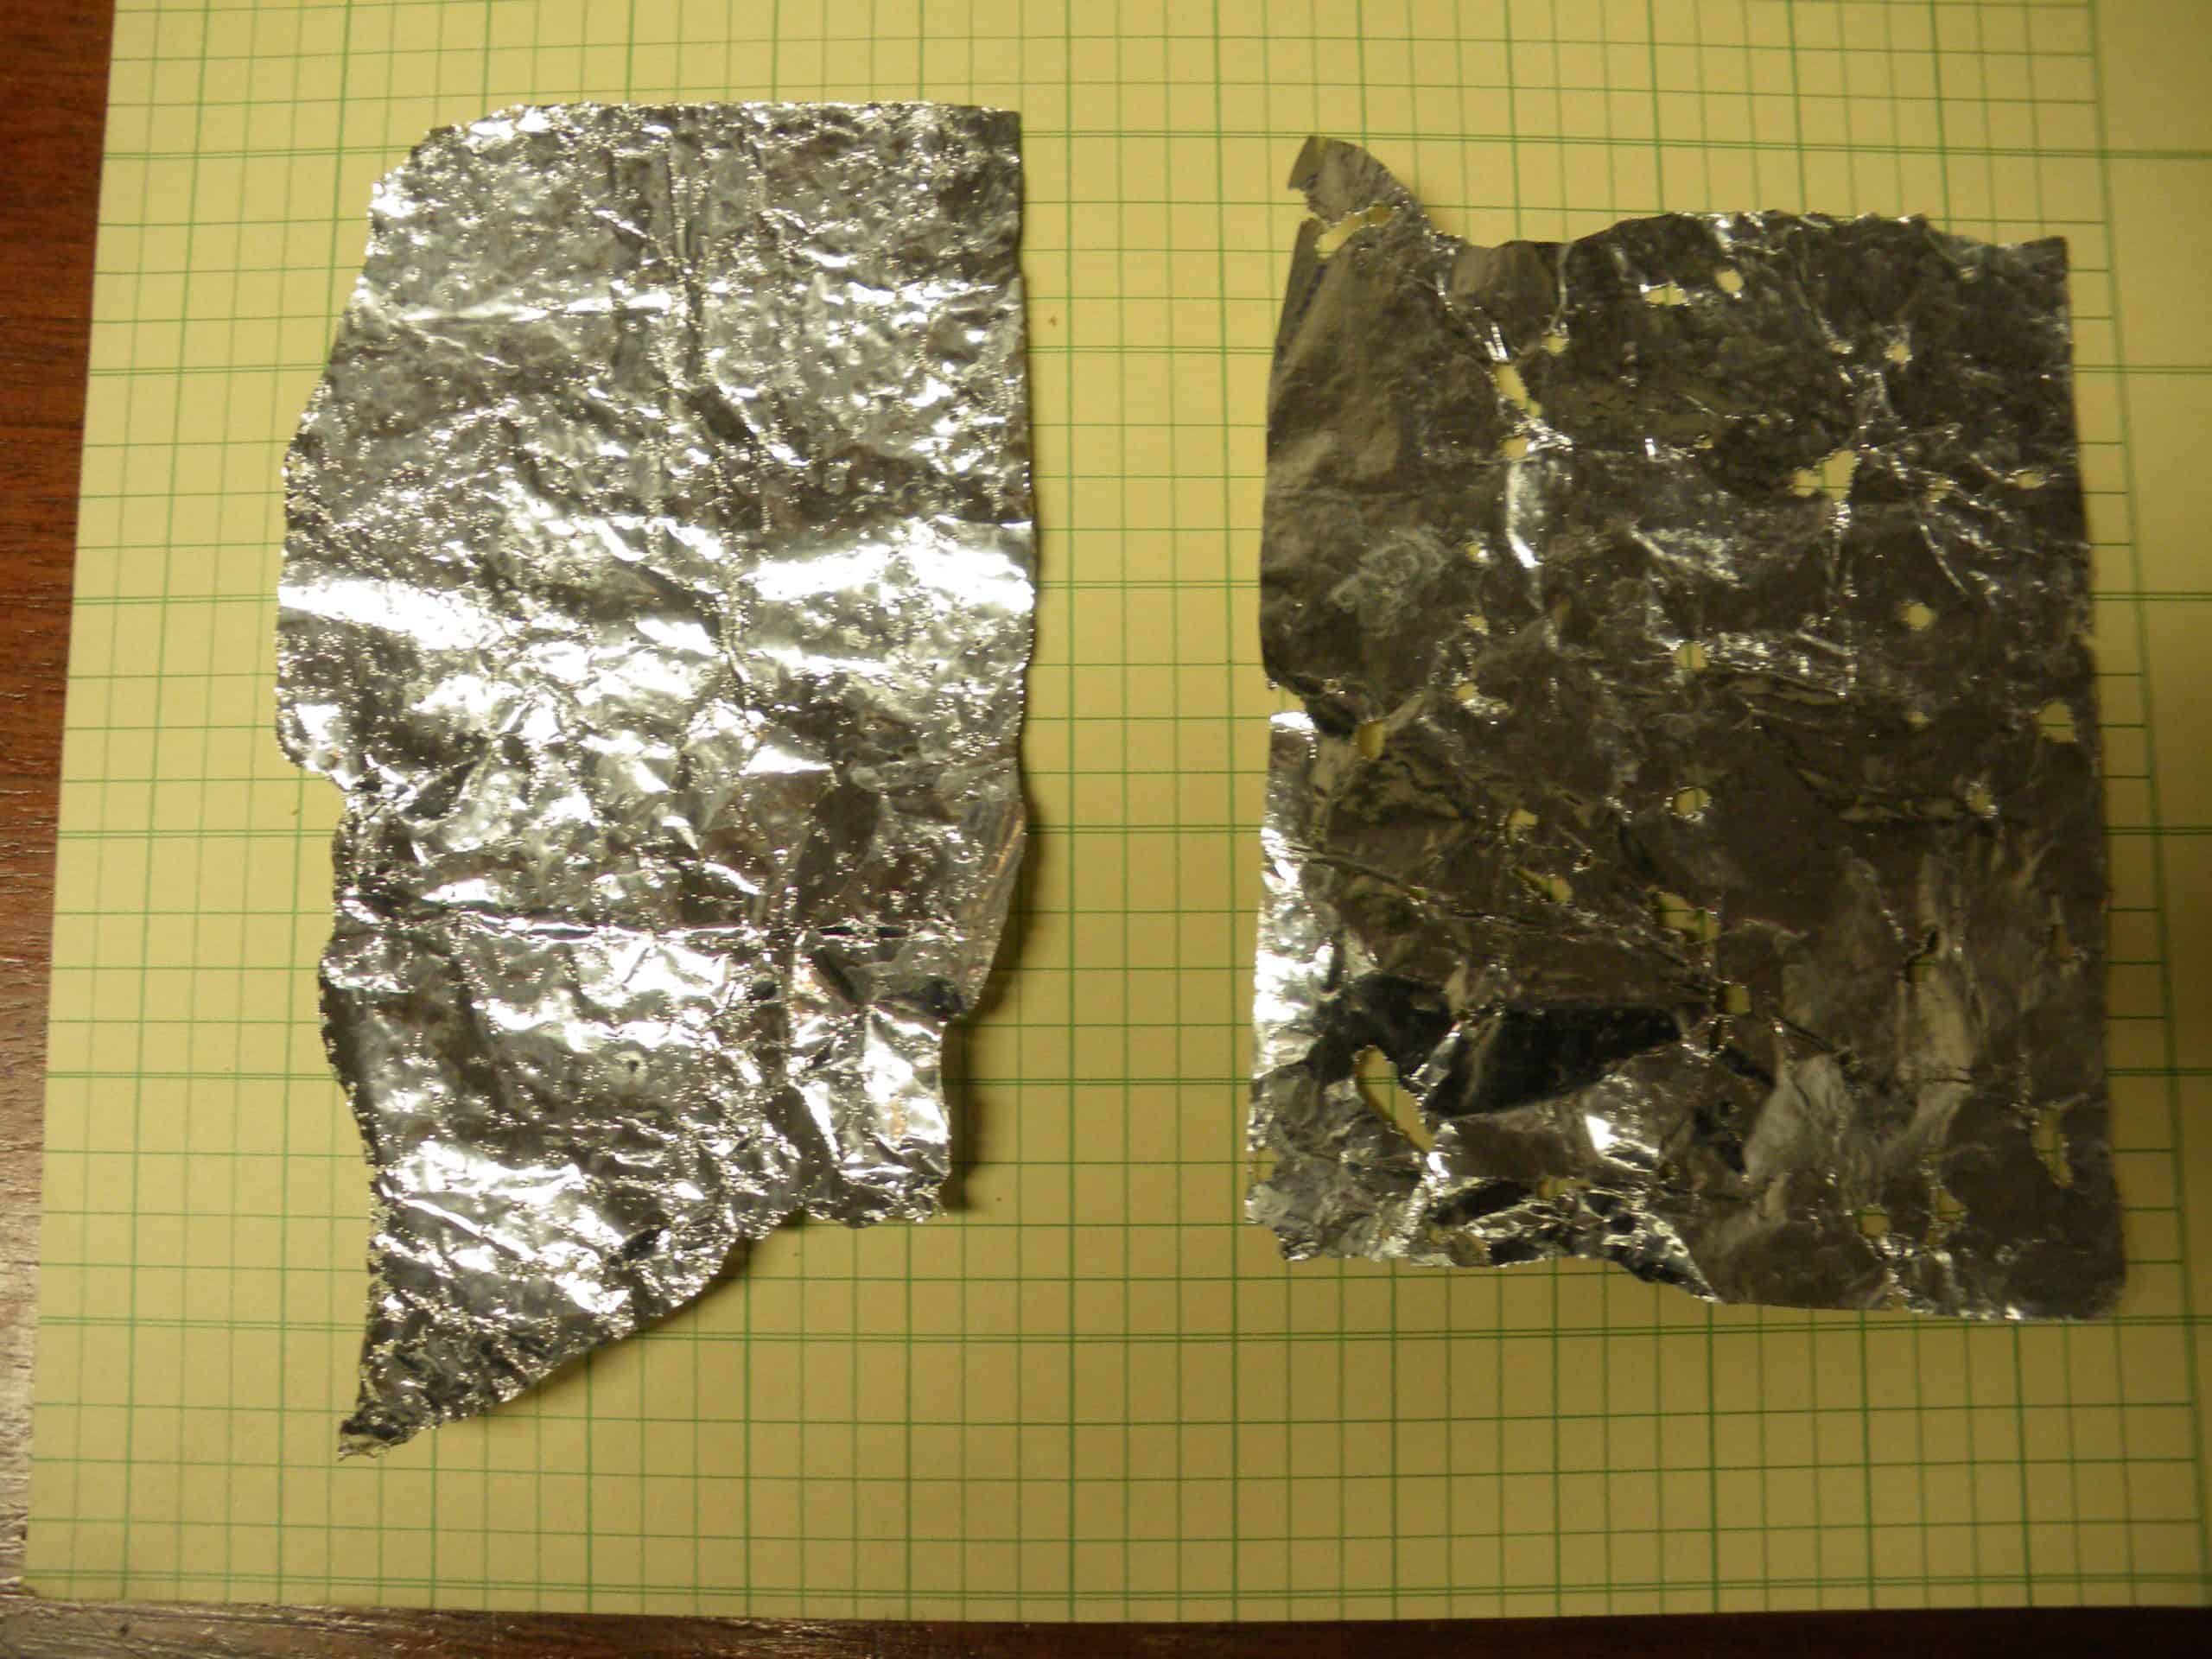 How to Perform a Foil Test in an Ultrasonic Cleaning Bath